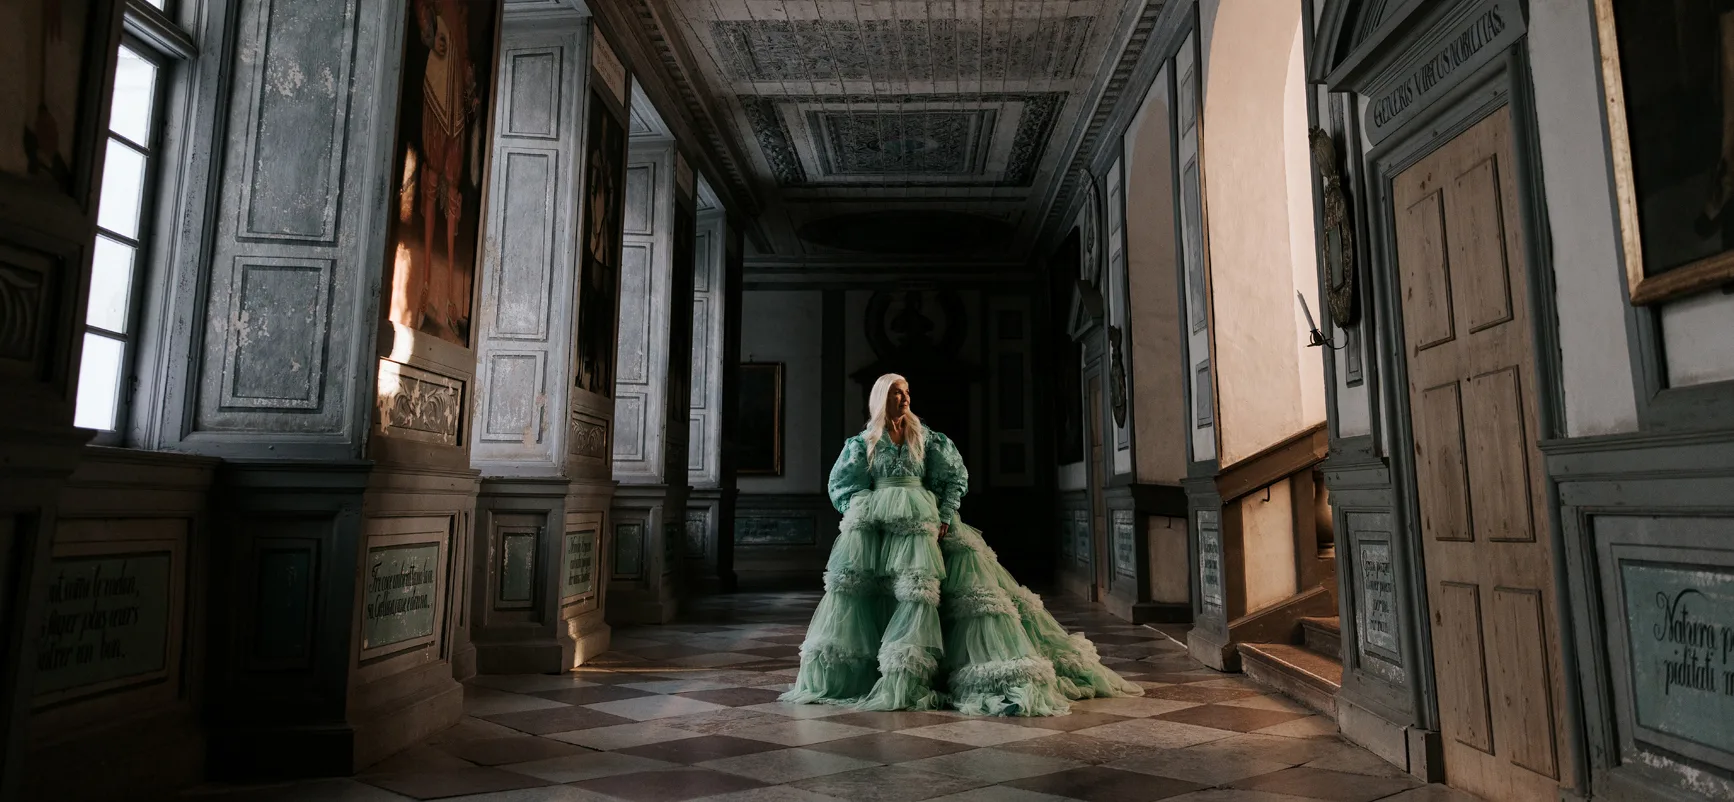 A person dressed in a dress by Louise Xin stands and poses on one of the floors of Skokloster Castle.